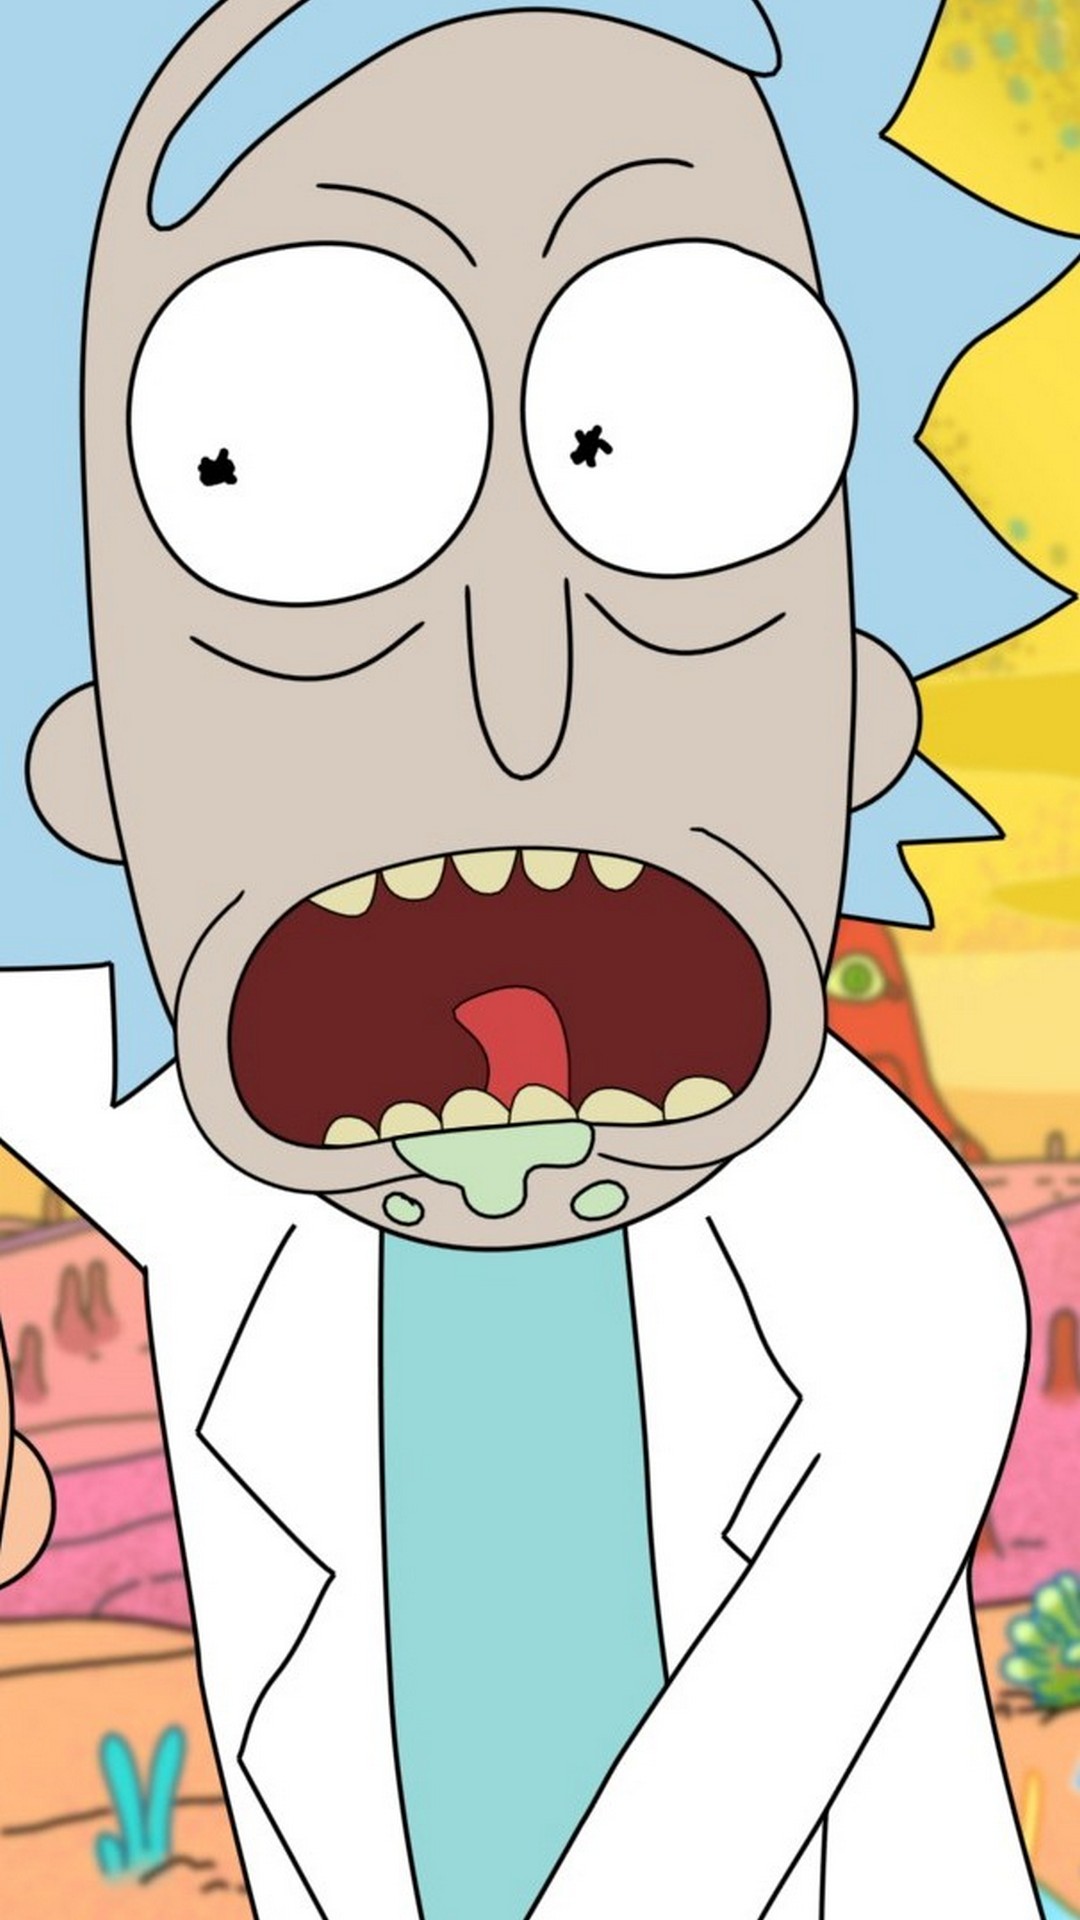 Iphone Wallpaper Rick And Morty 1080p With High-resolution - Rick And Morty Profile - HD Wallpaper 